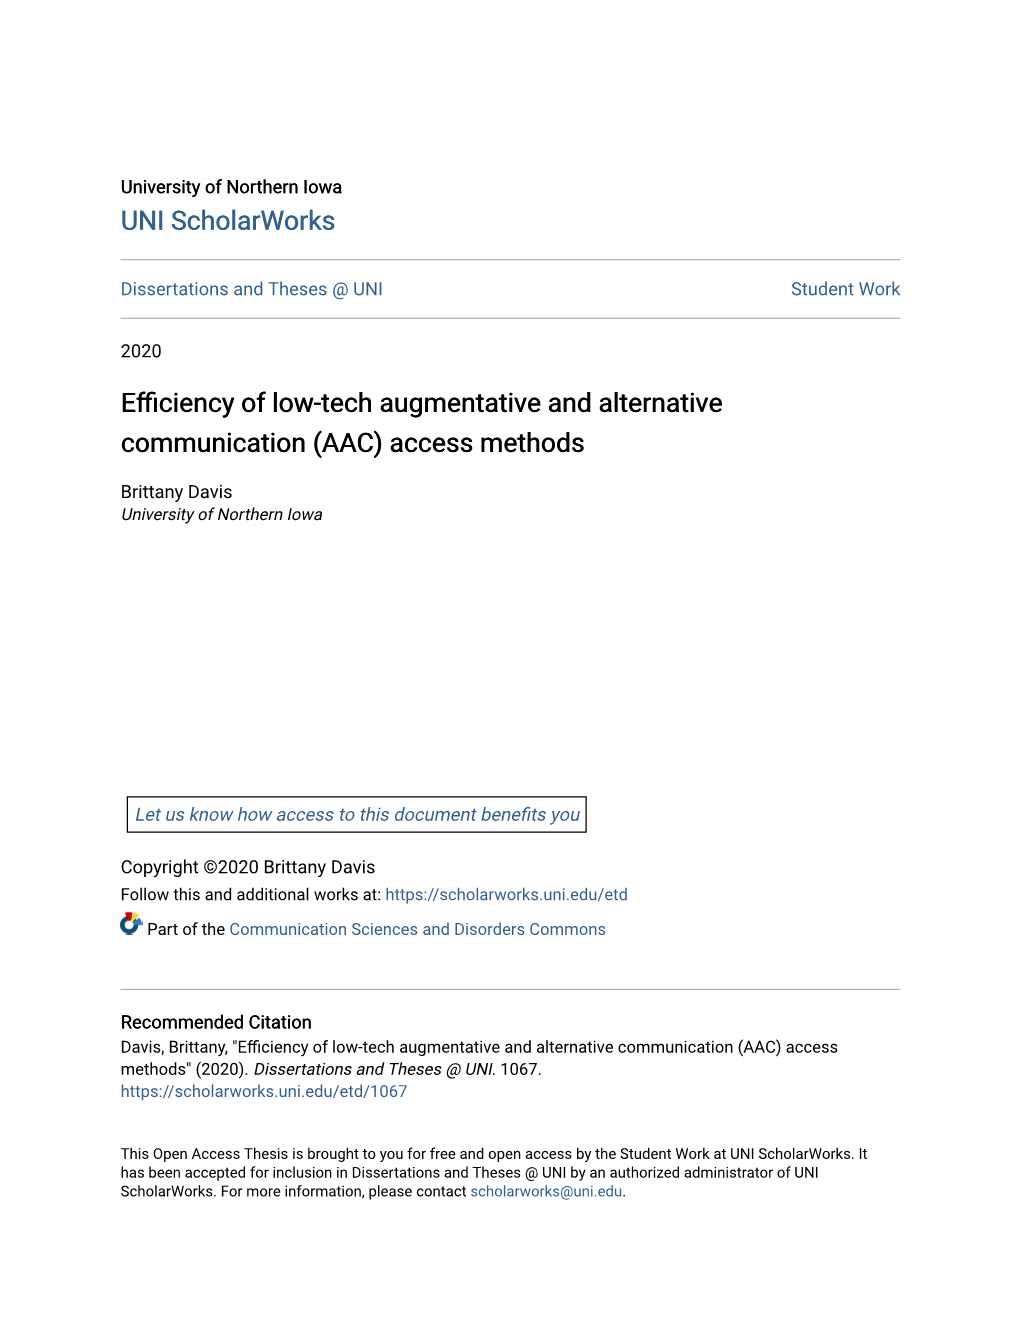 Efficiency of Low-Tech Augmentative and Alternative Communication (AAC) Access Methods